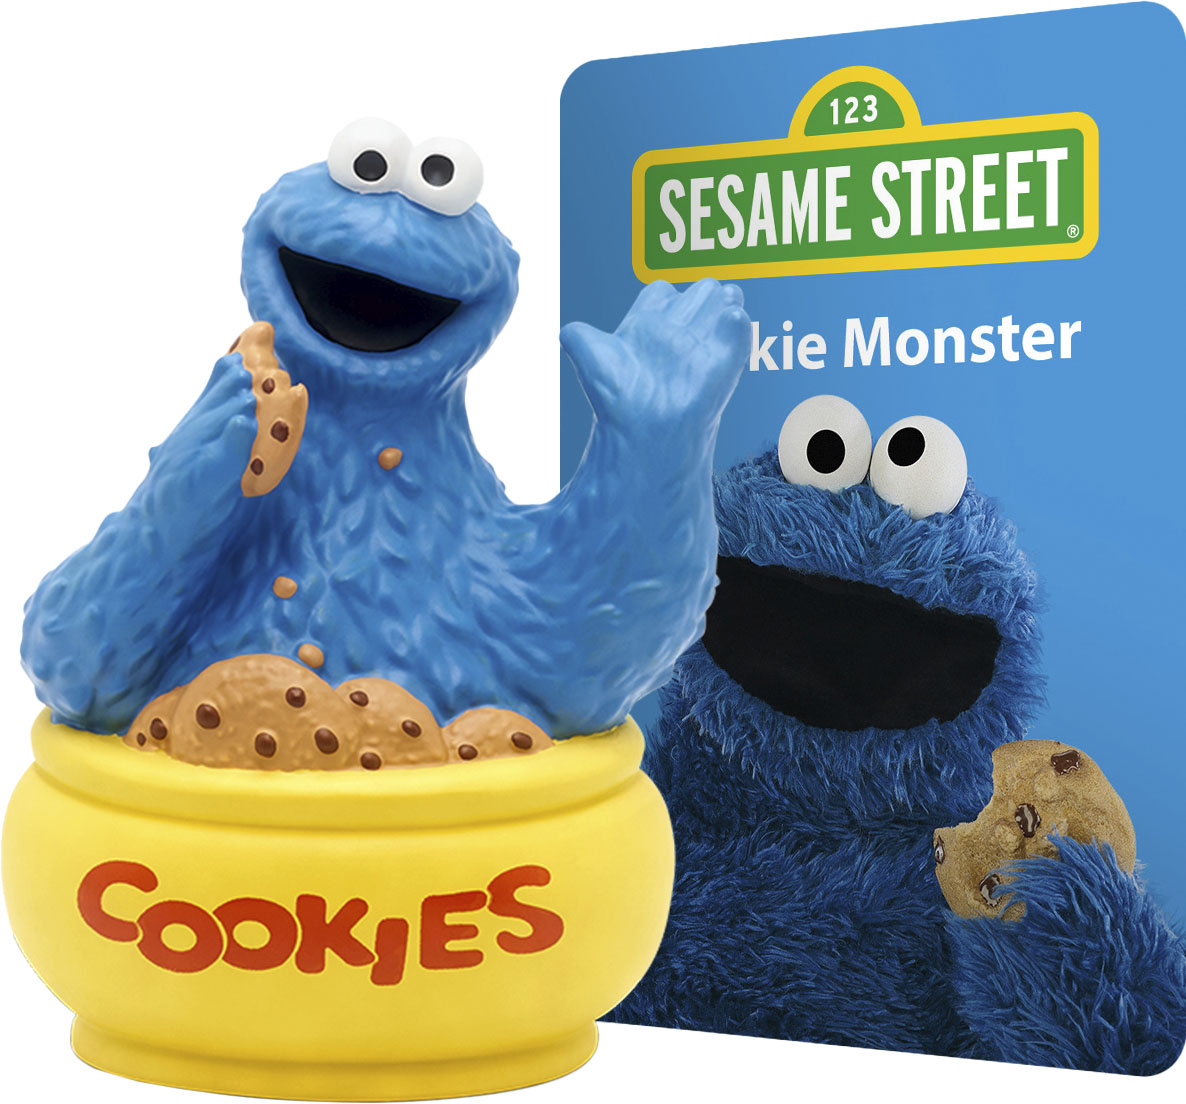 Left View: Tonies Cookie Monster from Sesame Street, Audio Play Figurine for Portable Speaker, Small, Blue, Plastic